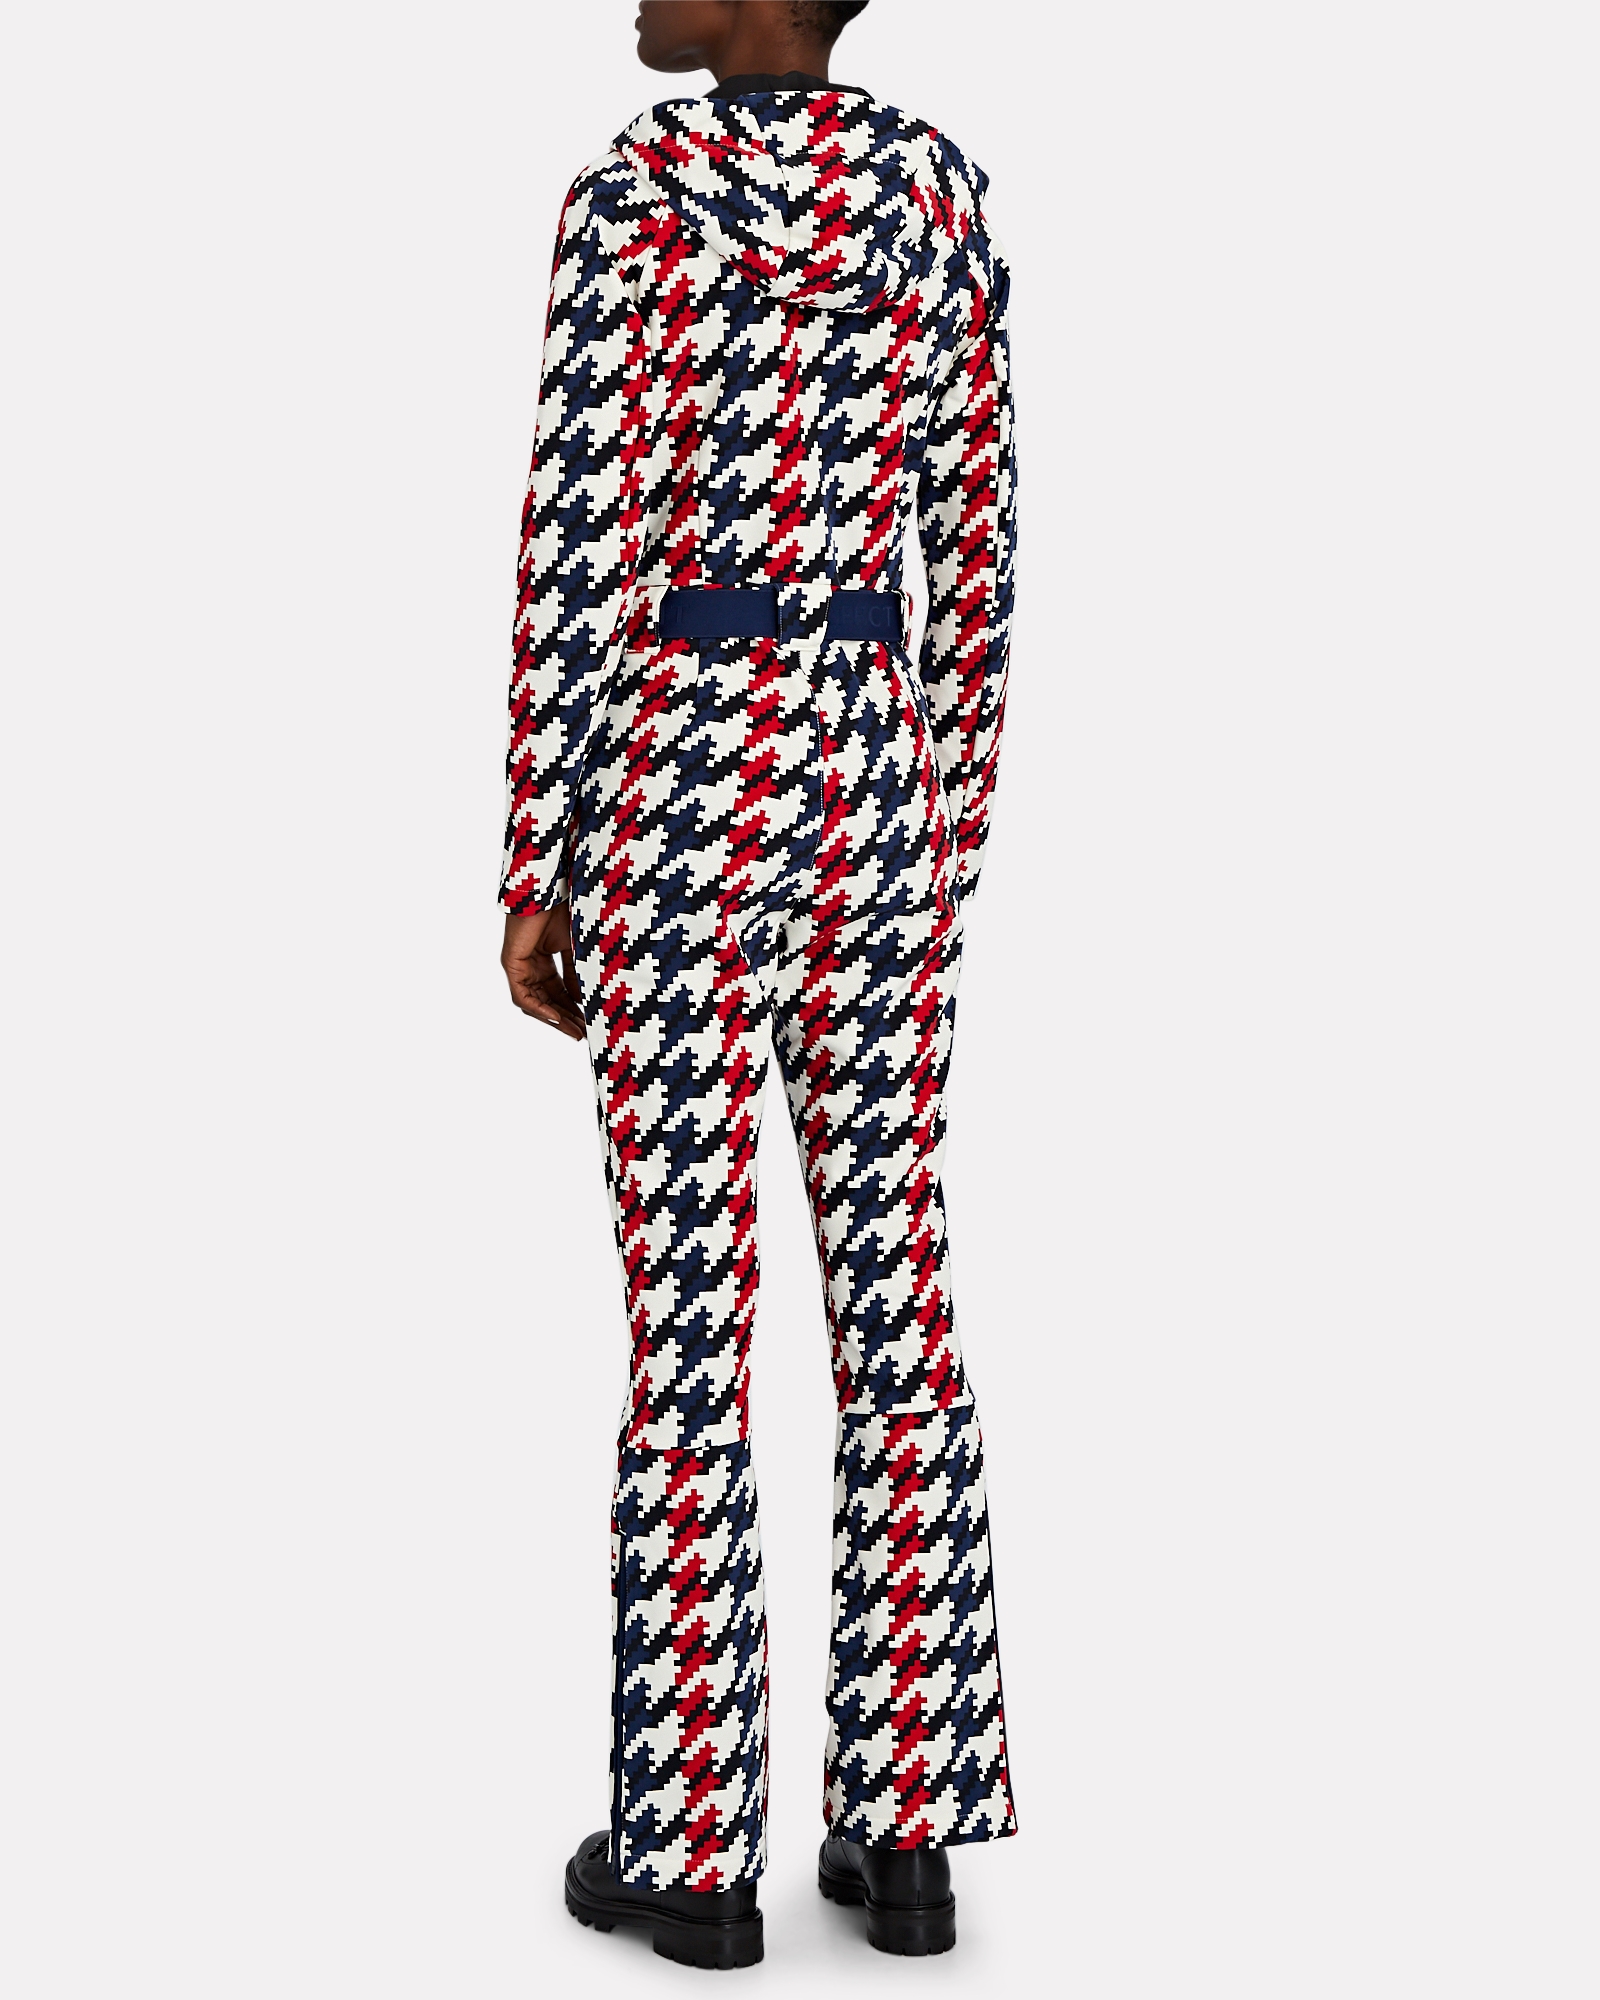 Perfect Moment Star Houndstooth Ski Suit | INTERMIX®